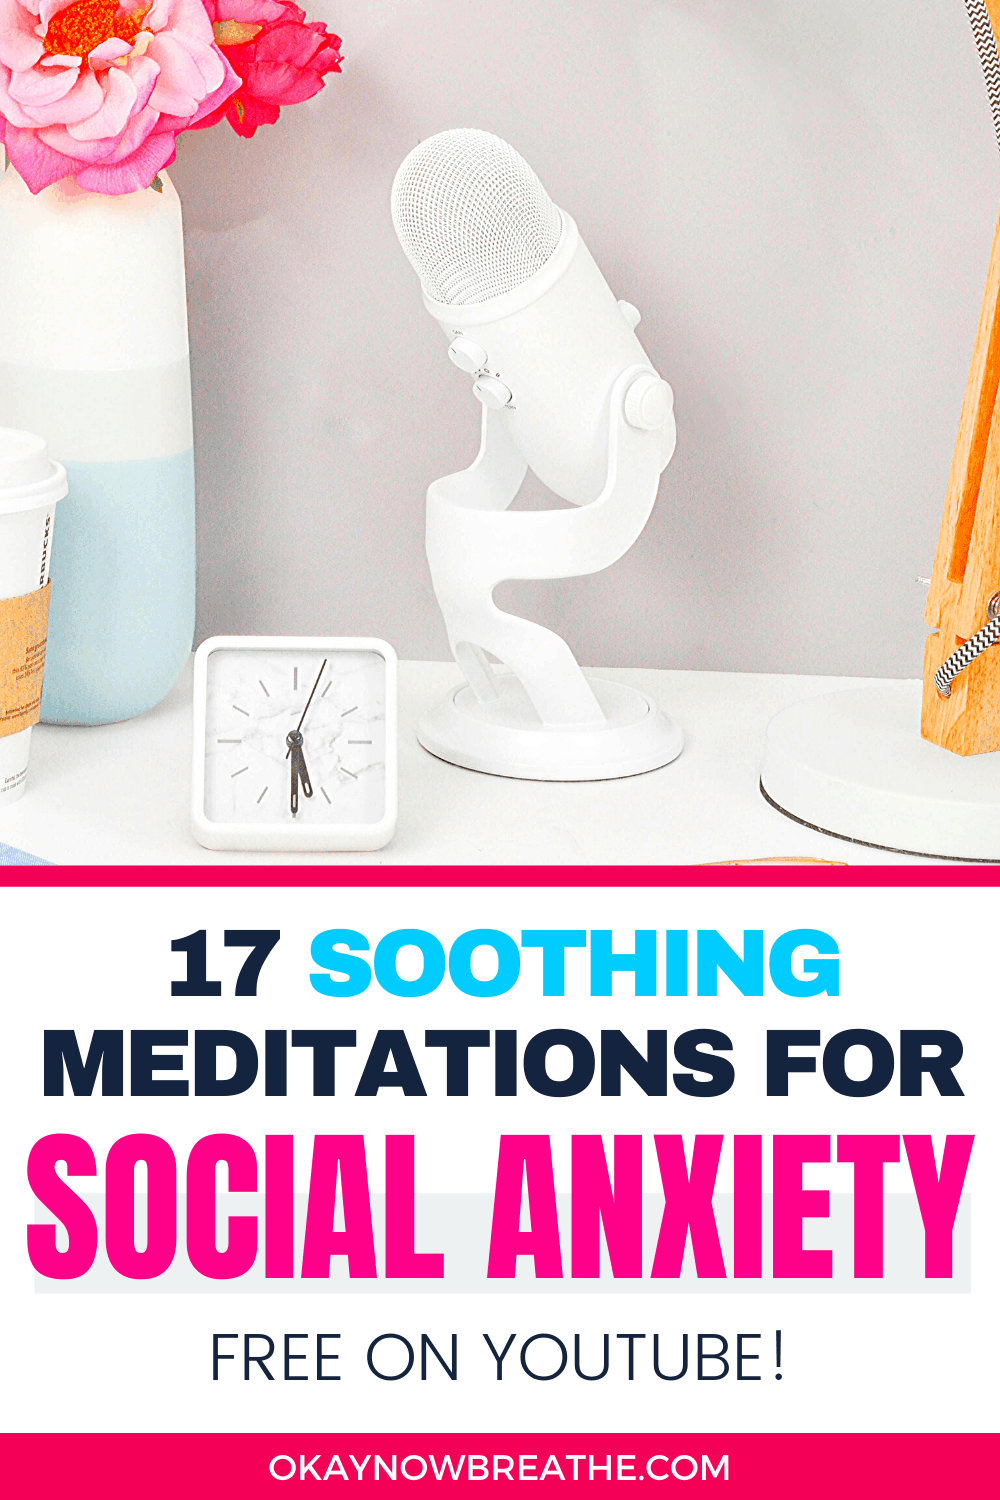 A white microphone next to a white clock and vase filled with pink flowers. Text says 17 soothing meditations for social anxiety free on YouTube